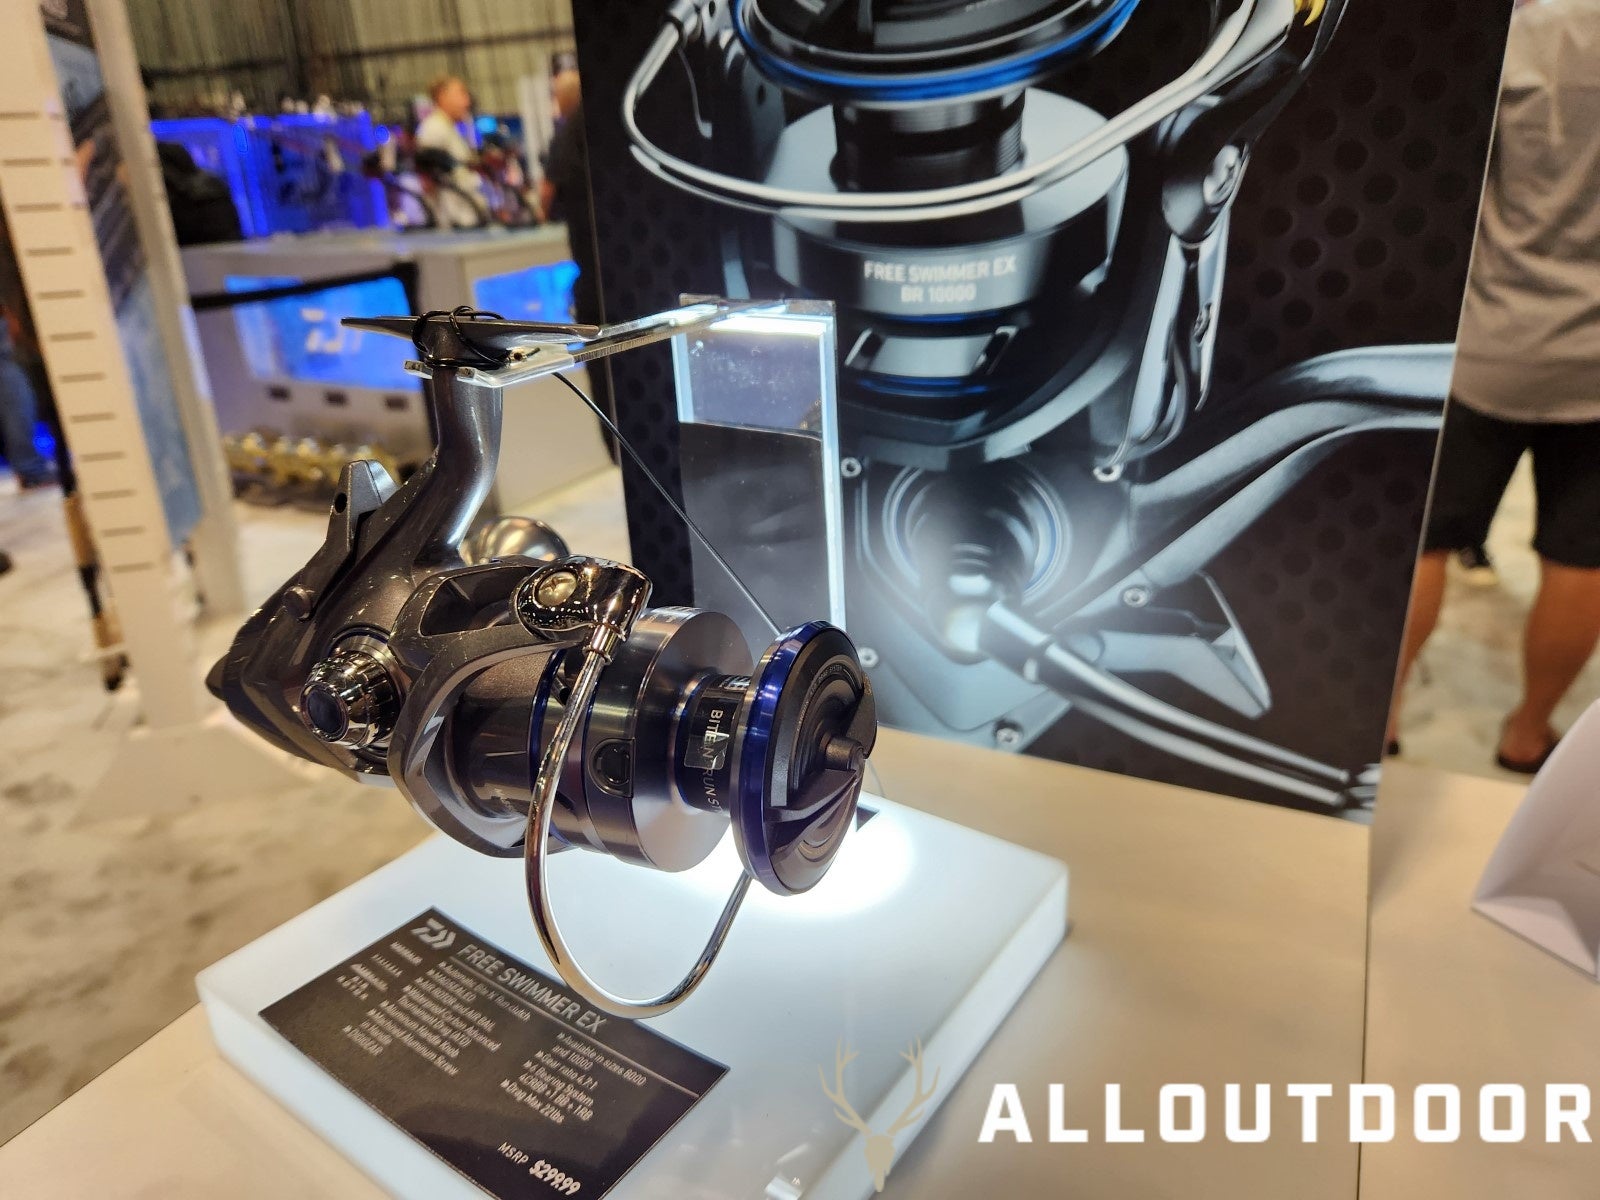 ICAST 2023]The New Free Swimmer EX from Daiwa